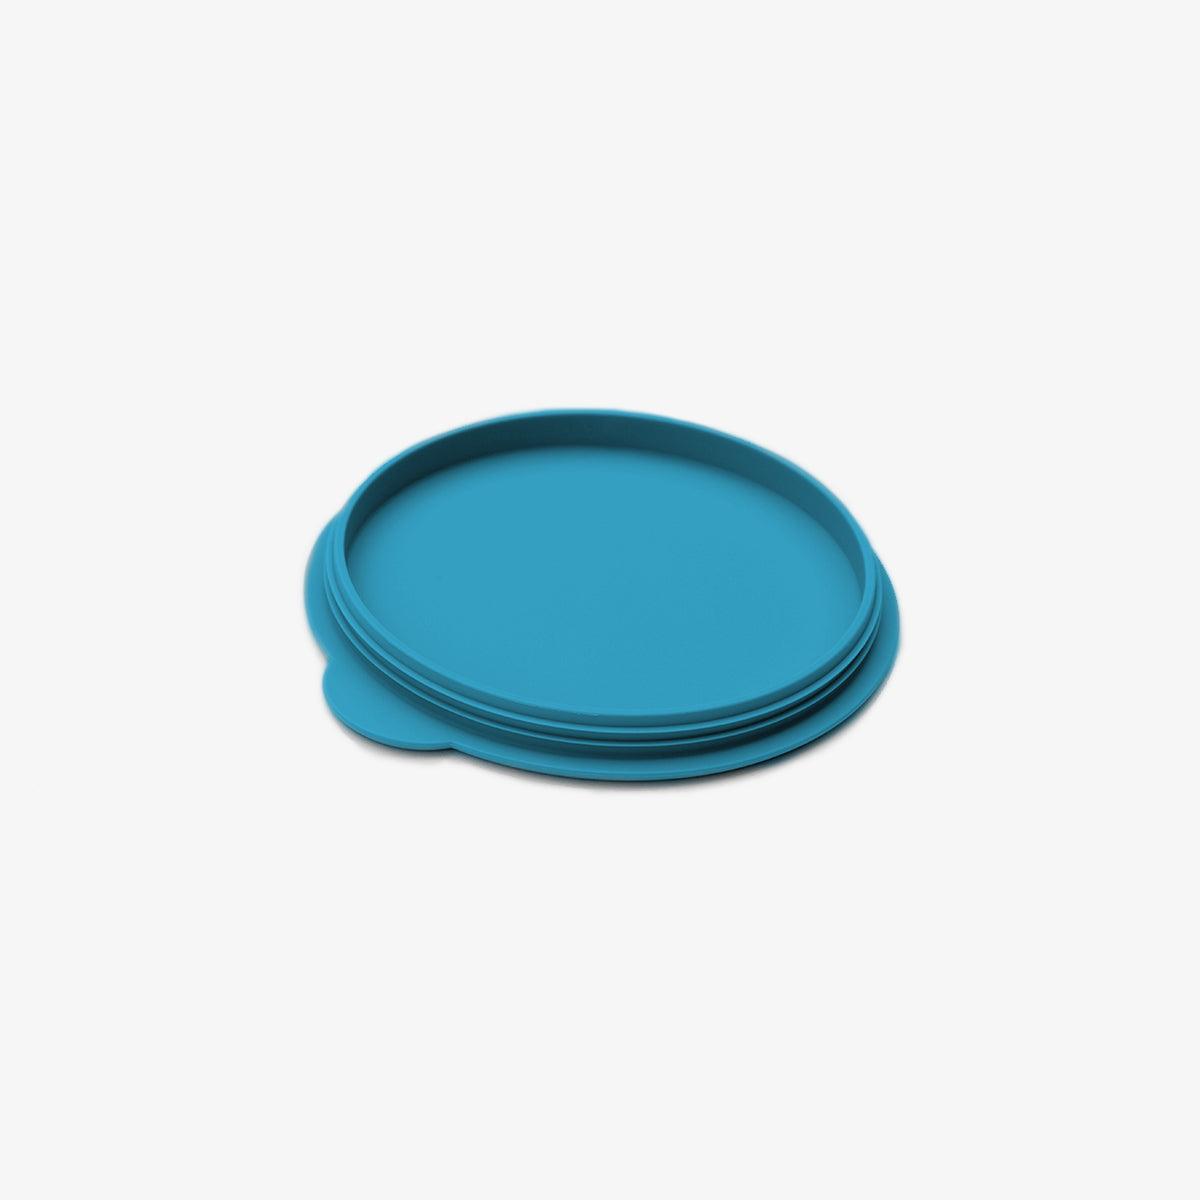 Mini Bowl Lid in Blue by ezpz / The Original All-In-One Silicone Plates & Placemats that Stick to the Table